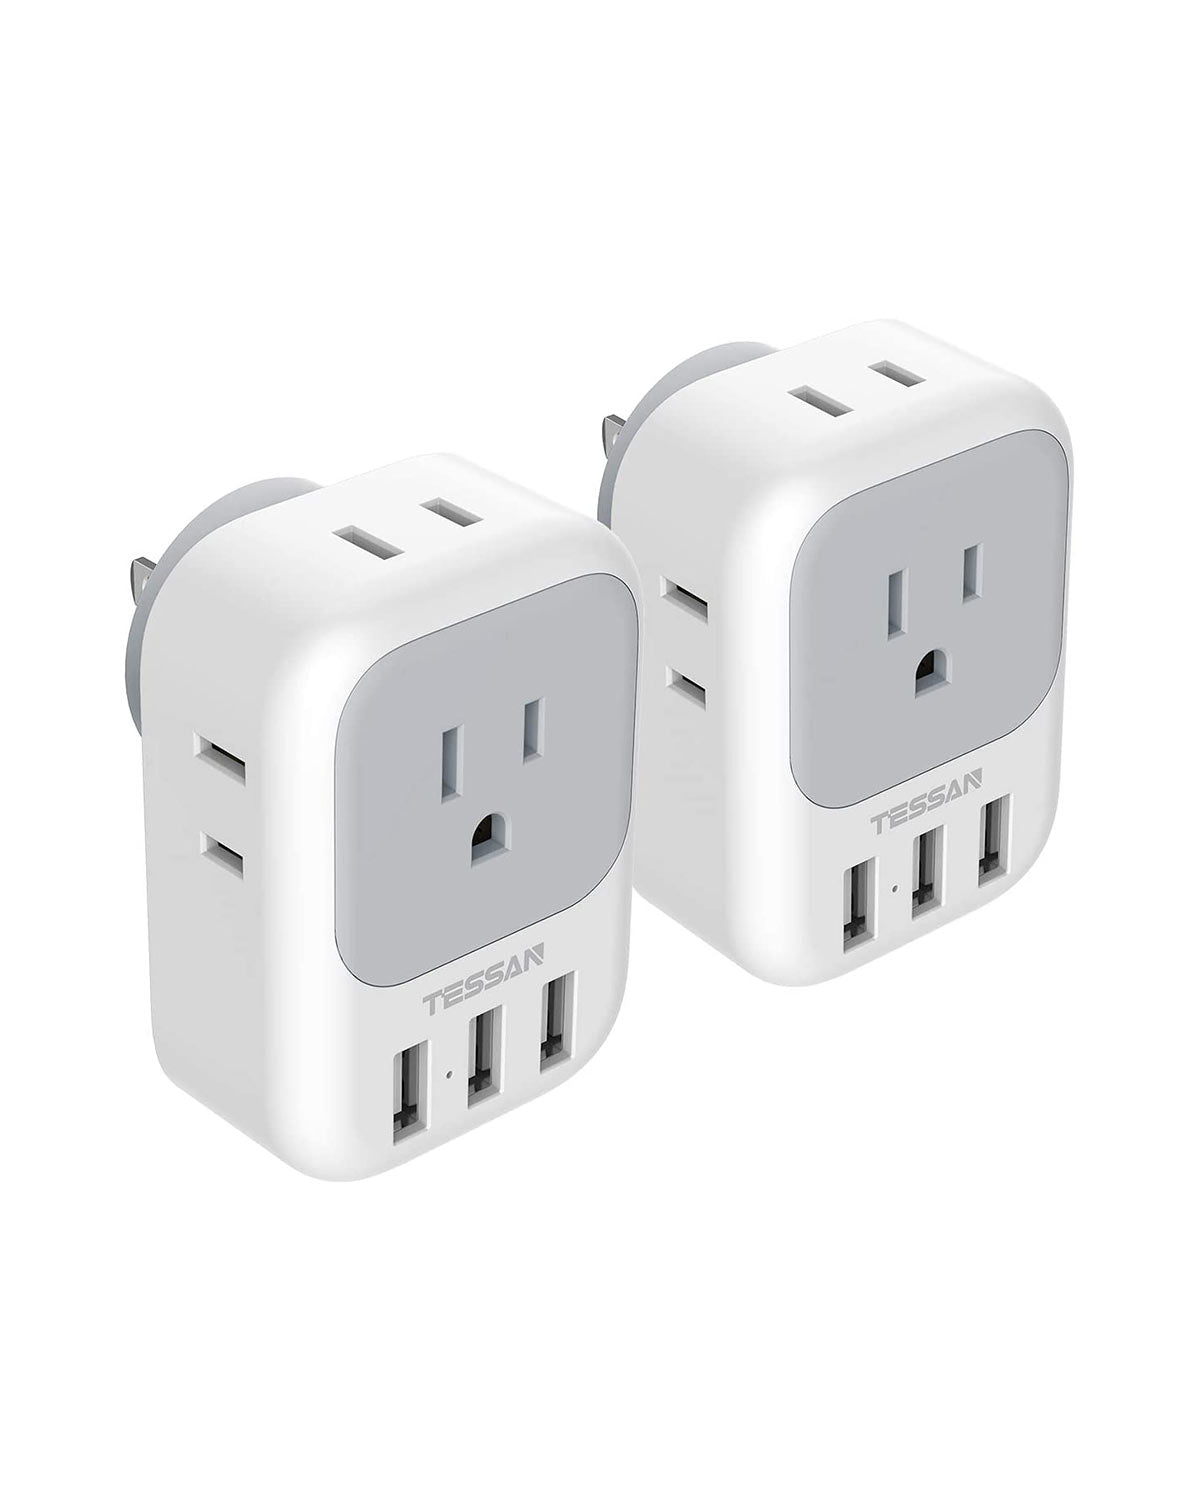 TESSAN 4 Electrical Outlet Extender with 3 USB Ports